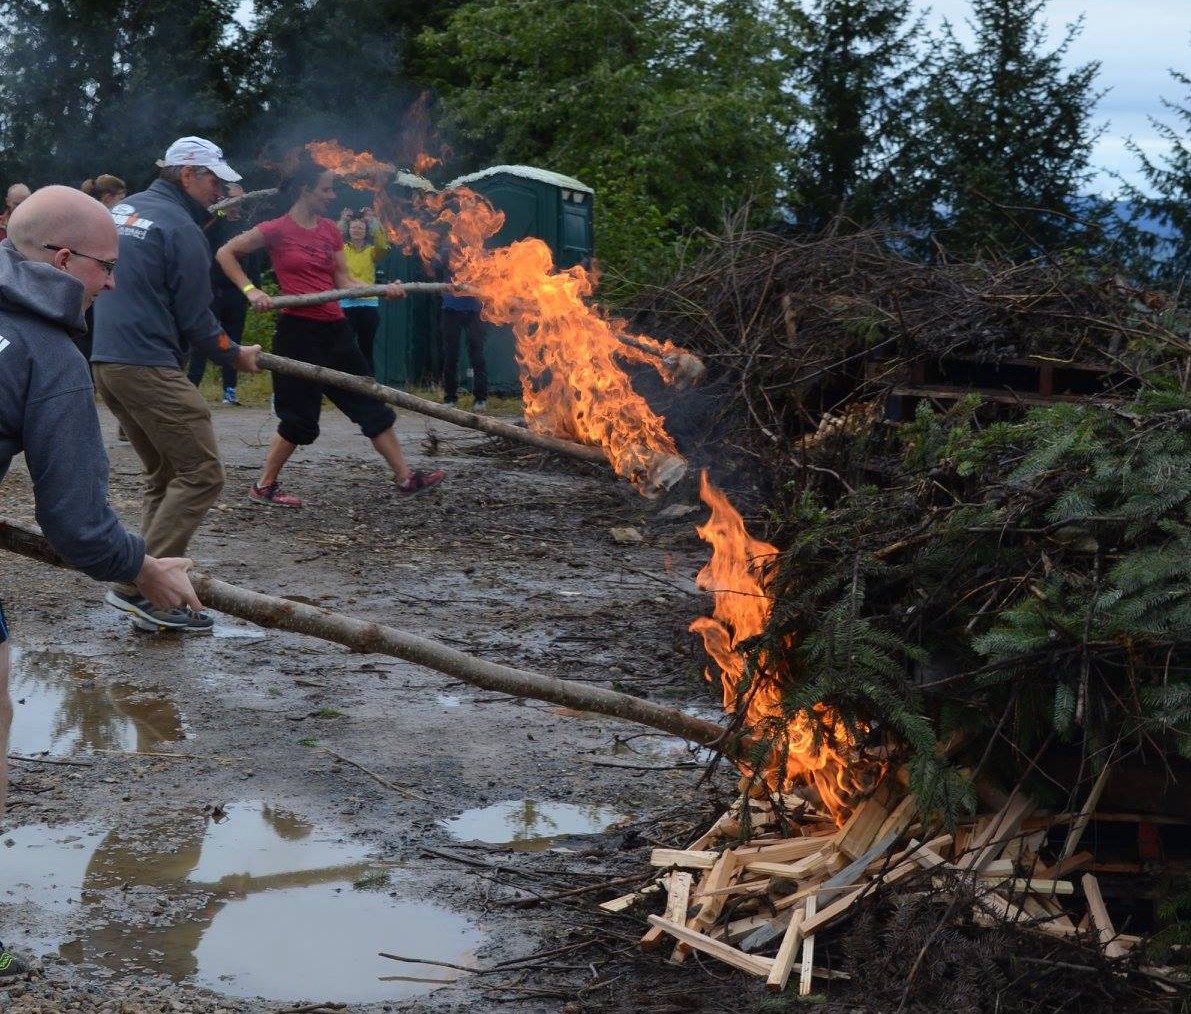 The winner's of the 2015 J'eet's Challenge race in Hoonah light signal fires near the finish line, Aug. 29, 2015. (Photo courtesy Icy Strait Point)